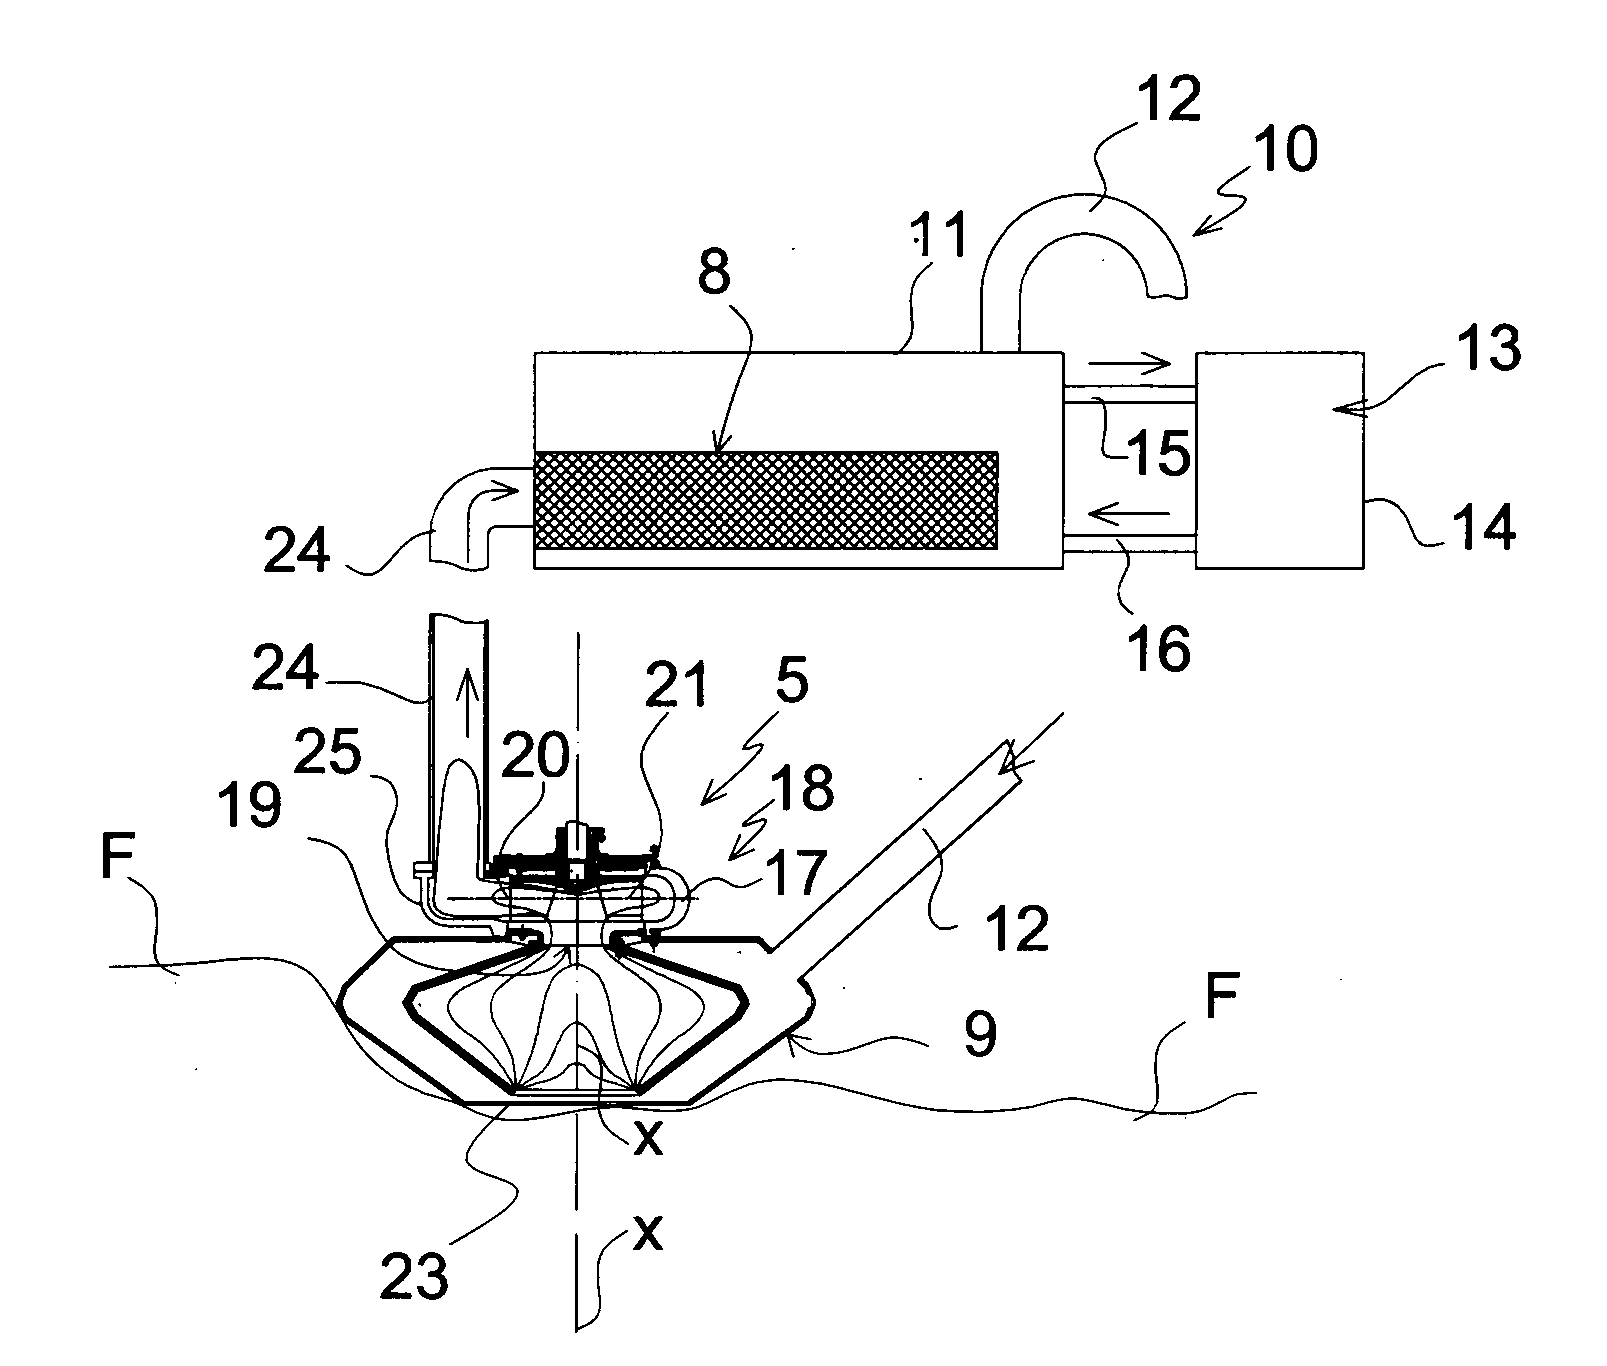 Apparatus and method for the dredging of sediments from the seabed